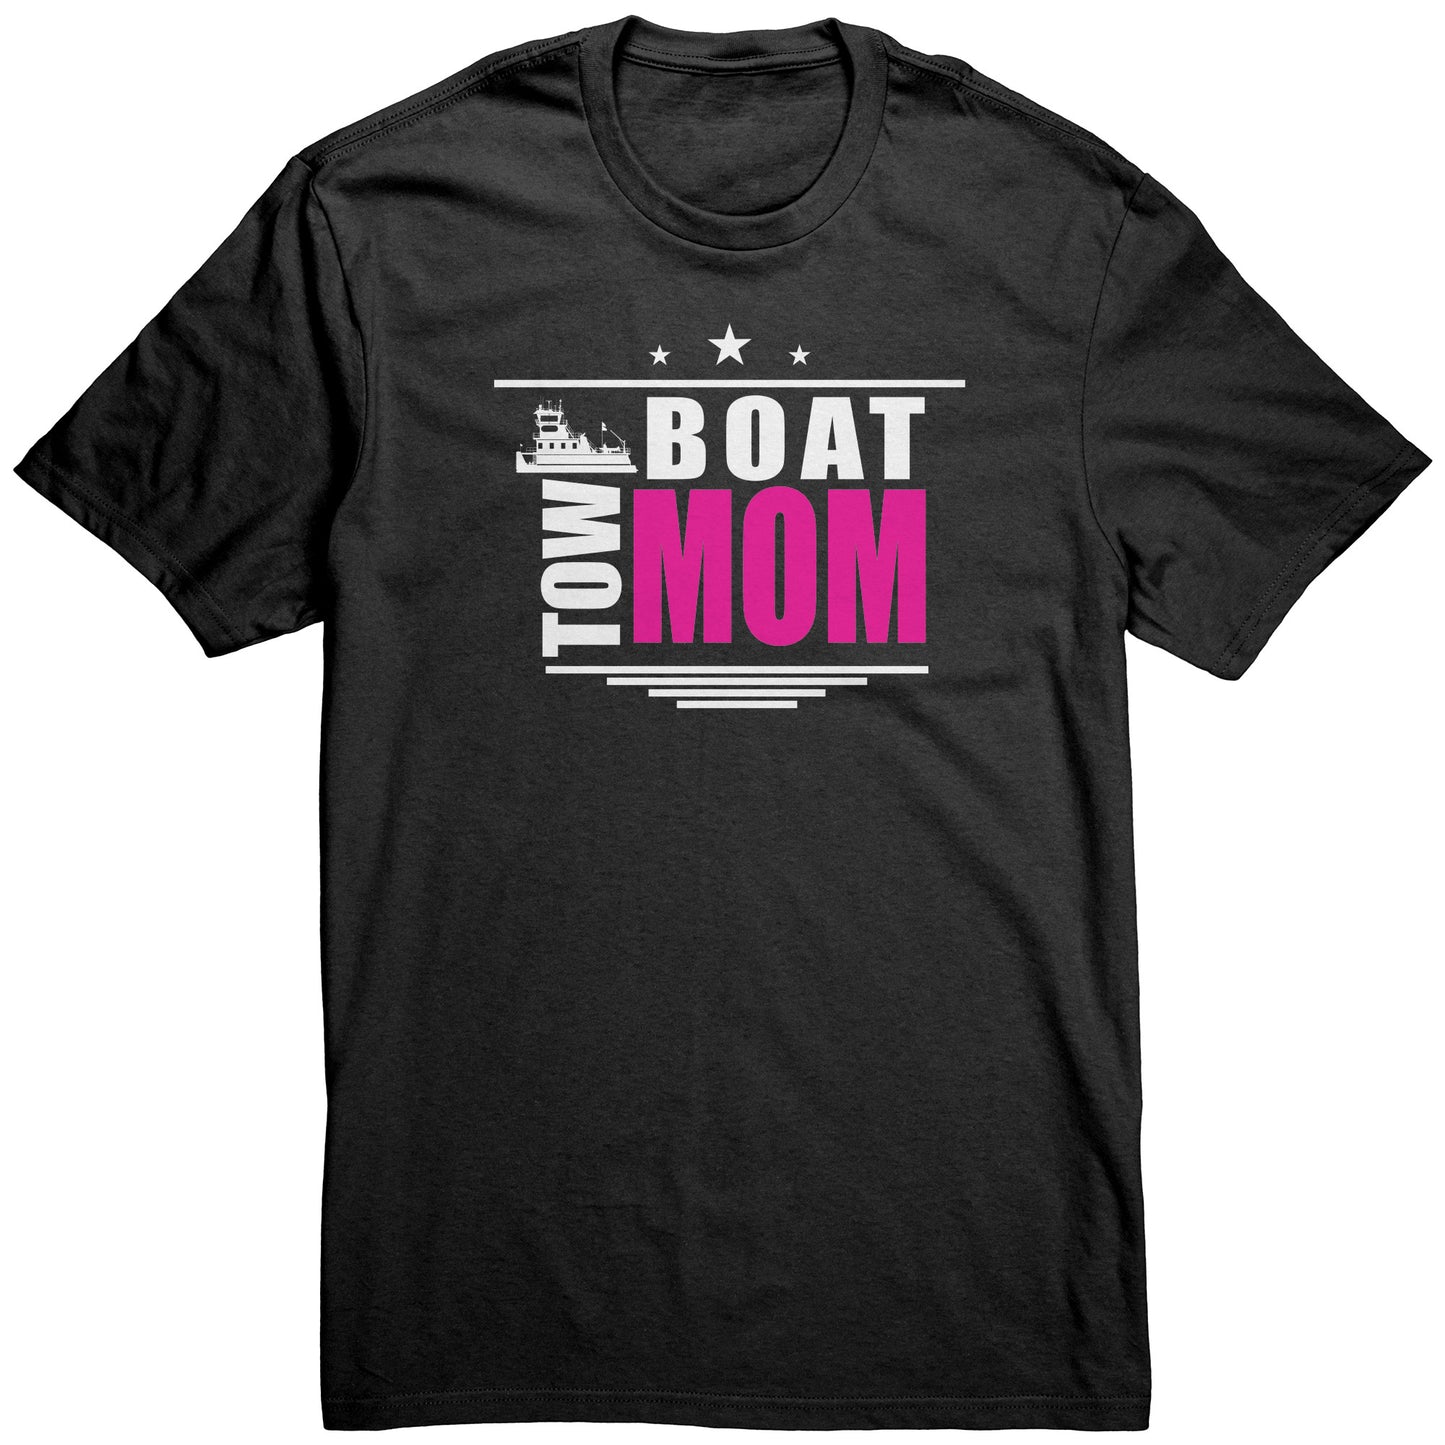 Towboat Mom! Towboater’s Mother Apparel T-Shirt